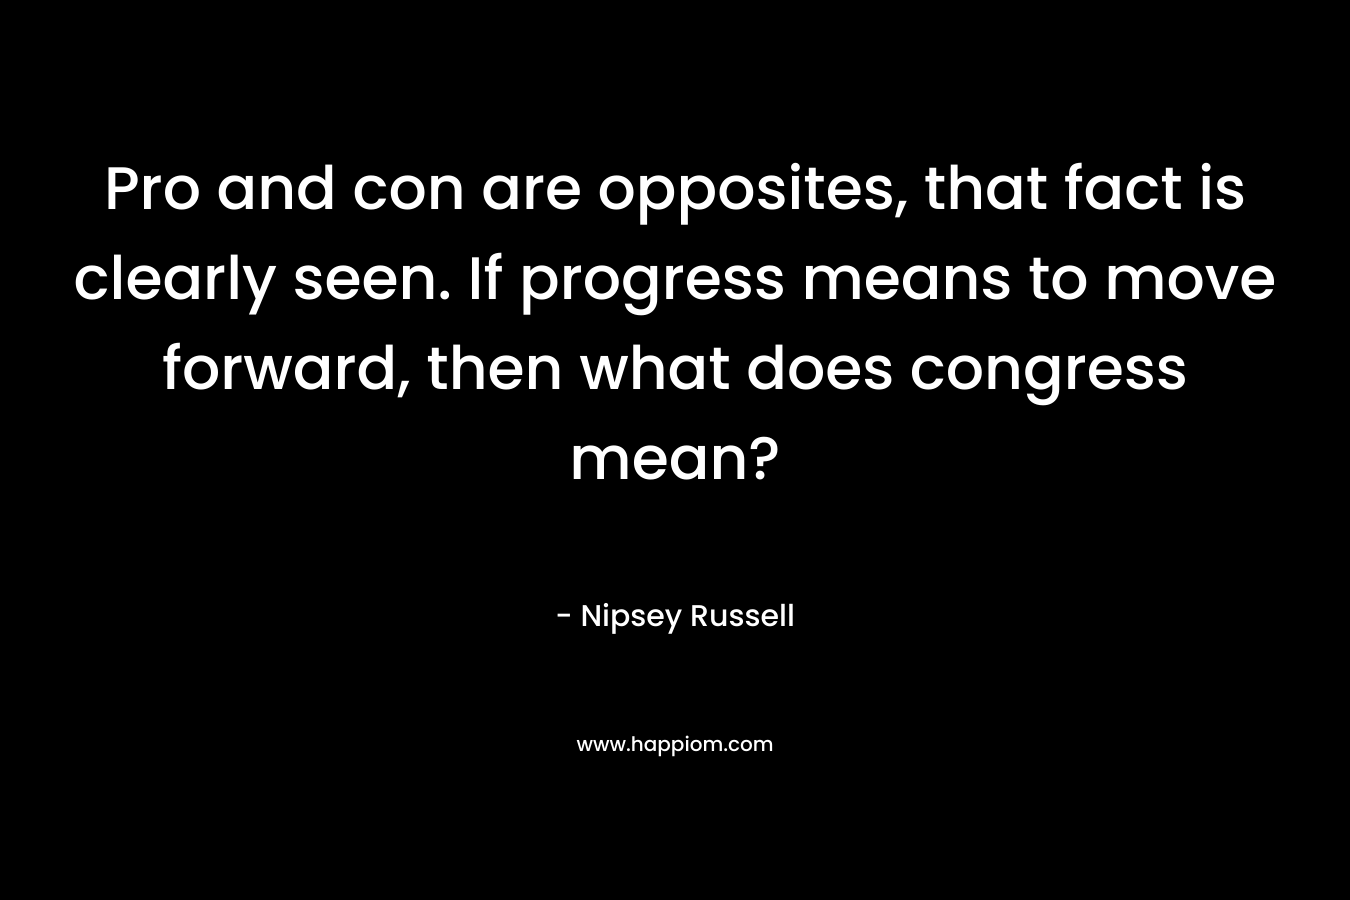 Pro and con are opposites, that fact is clearly seen. If progress means to move forward, then what does congress mean?